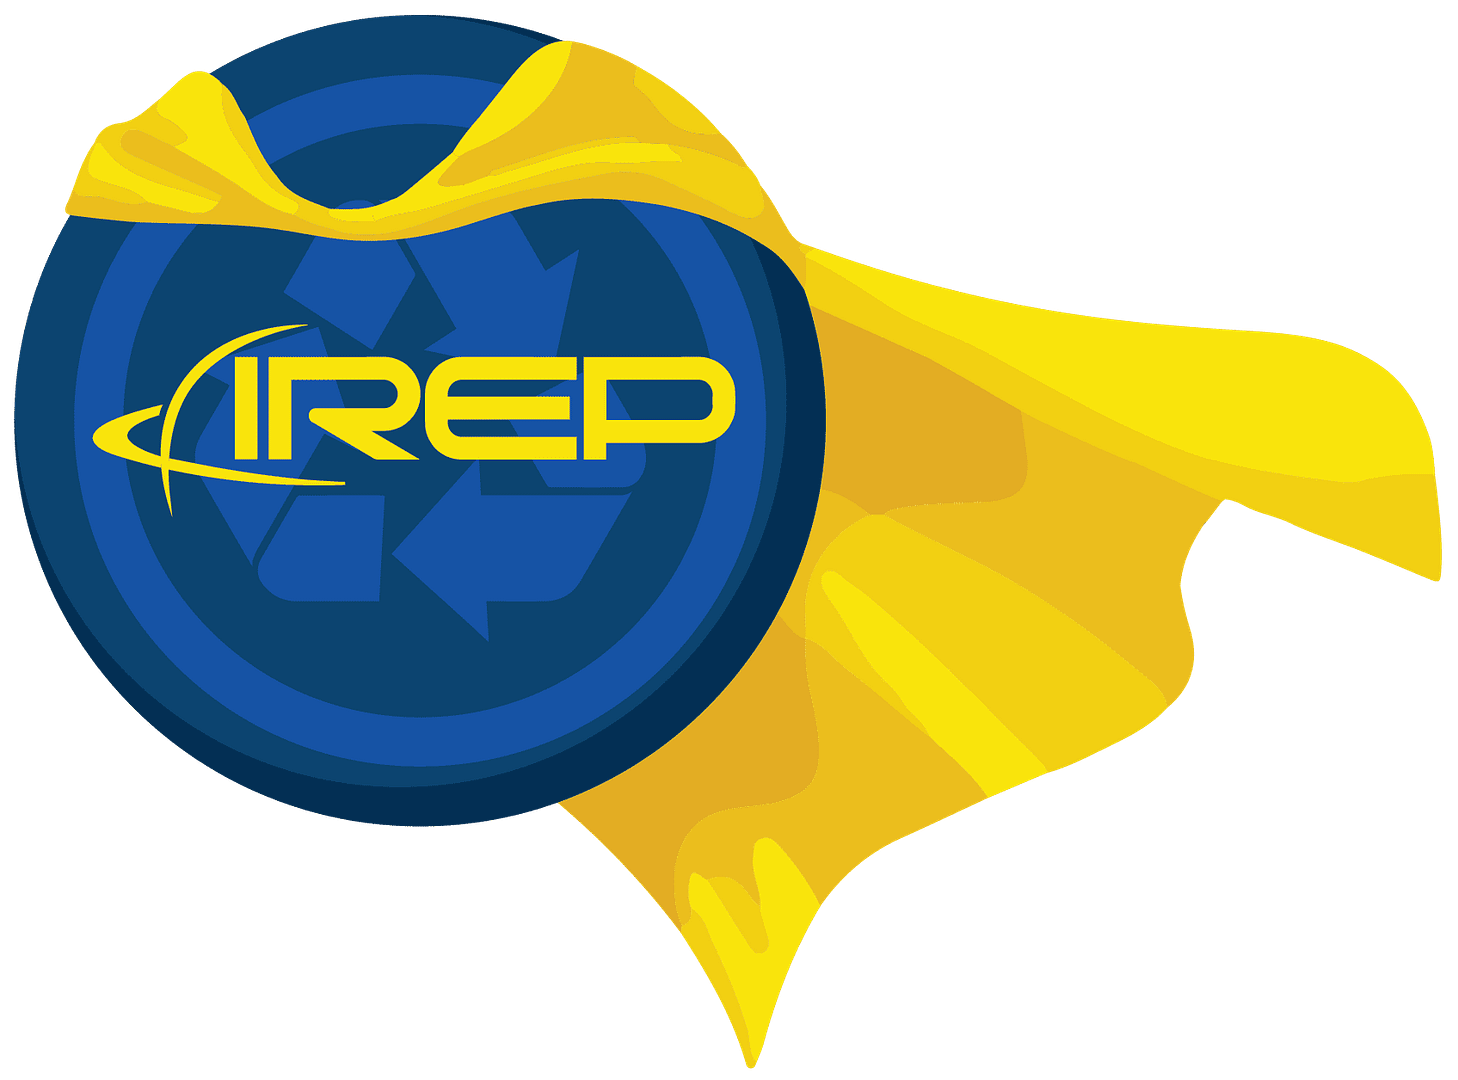 IREP Junk removal logo caped shield